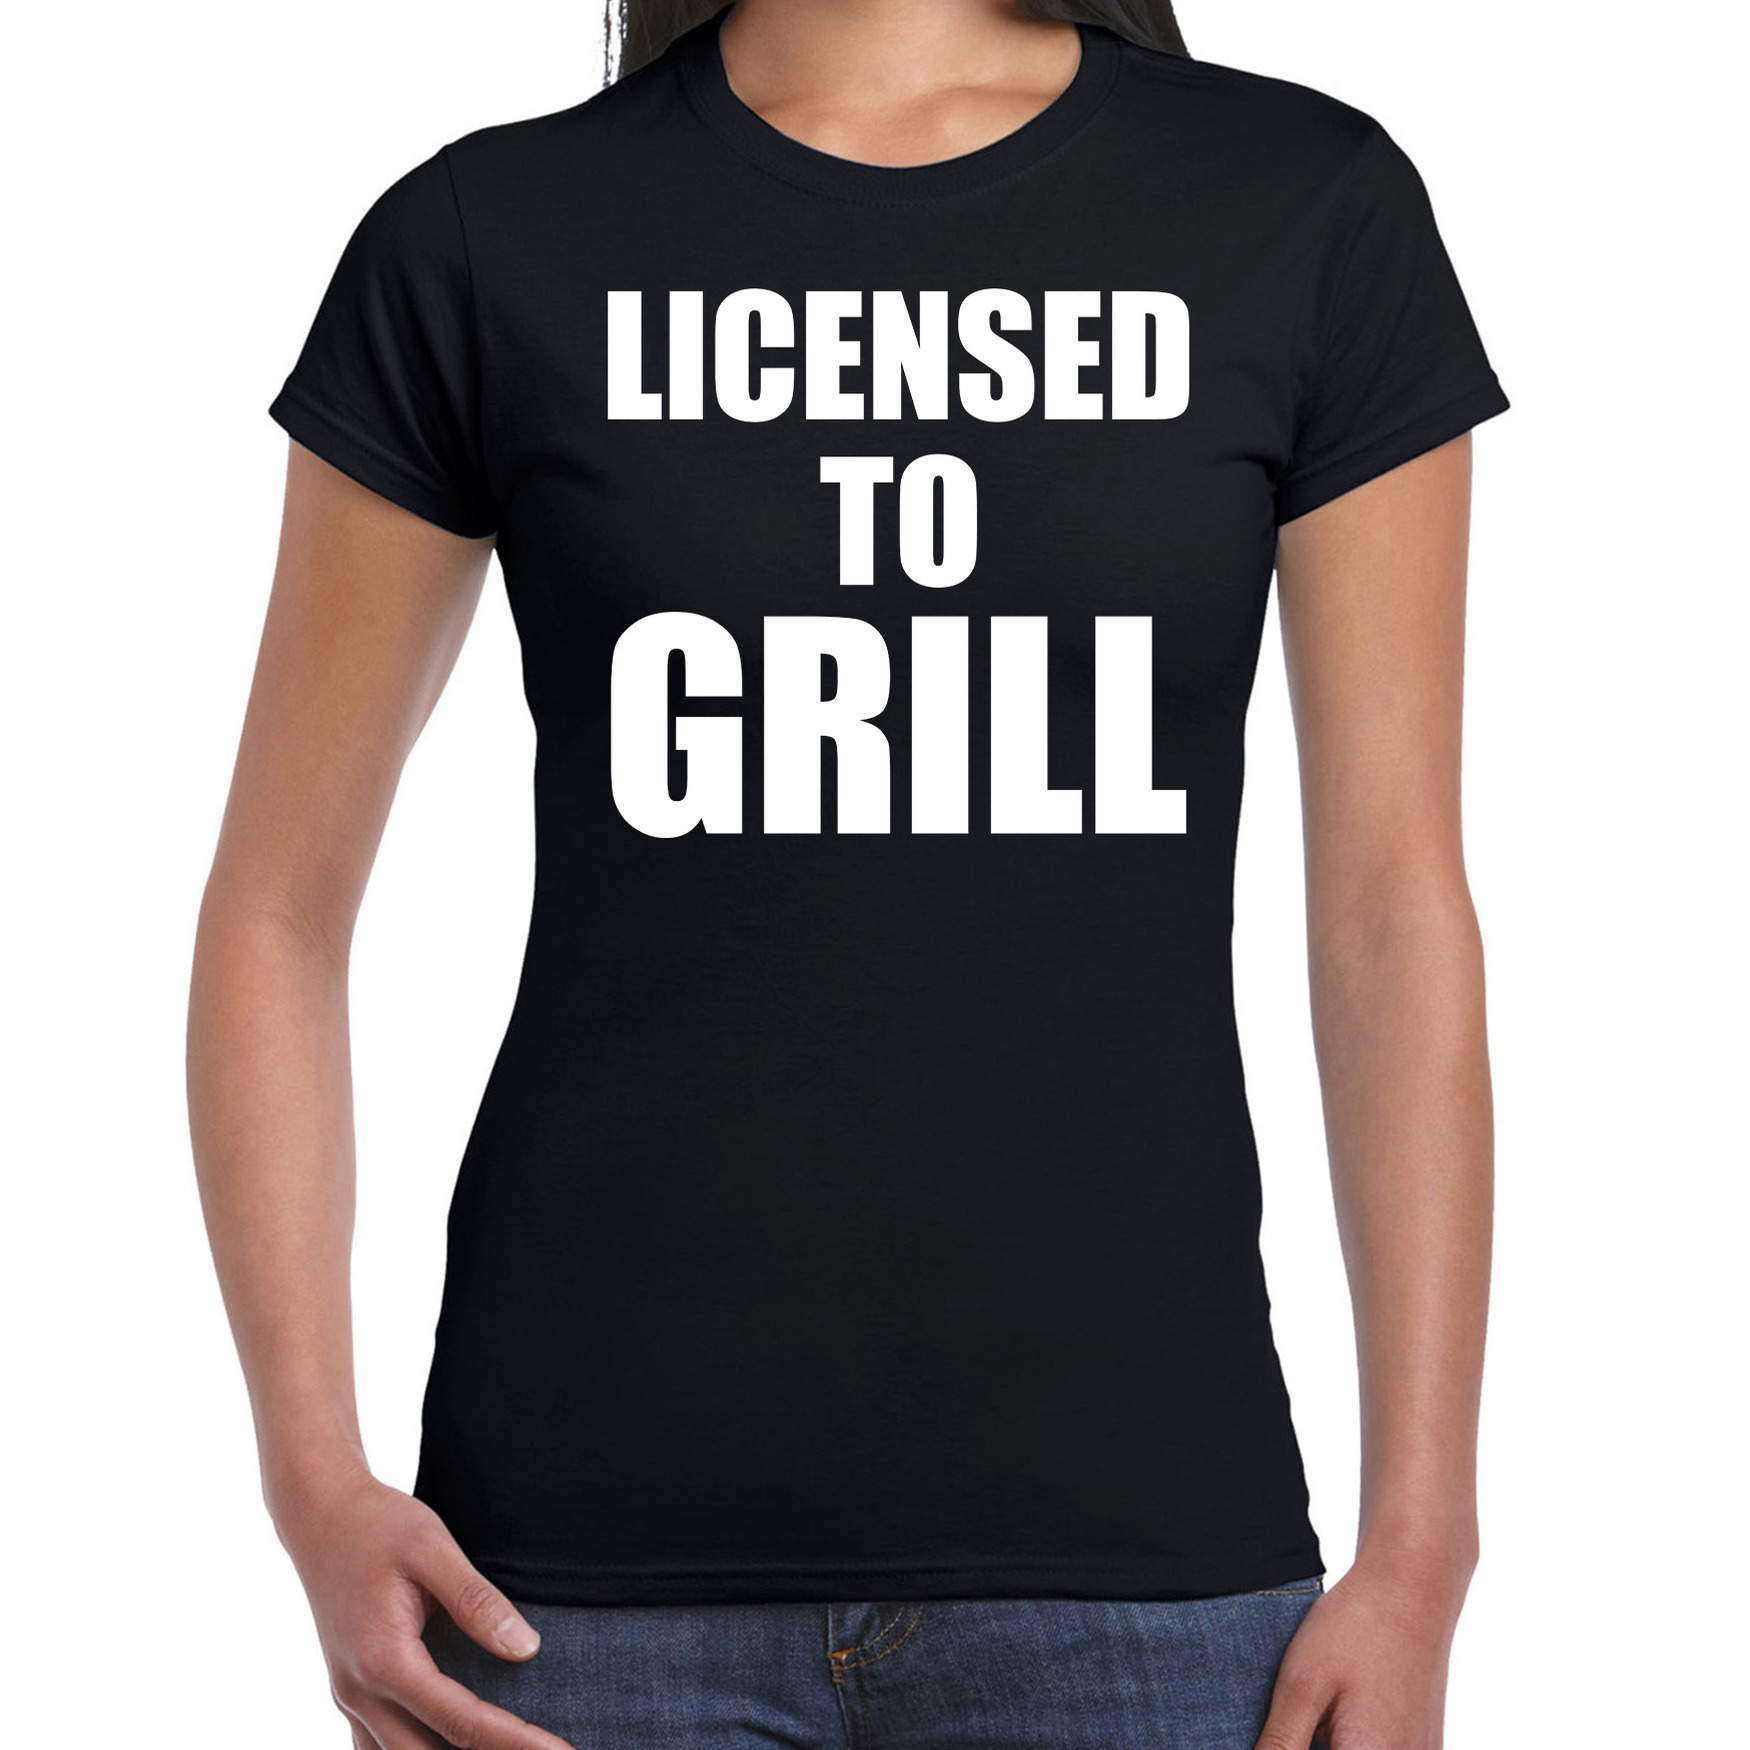 Licensed to grill bbq-barbecue cadeau t-shirt zwart voor dames